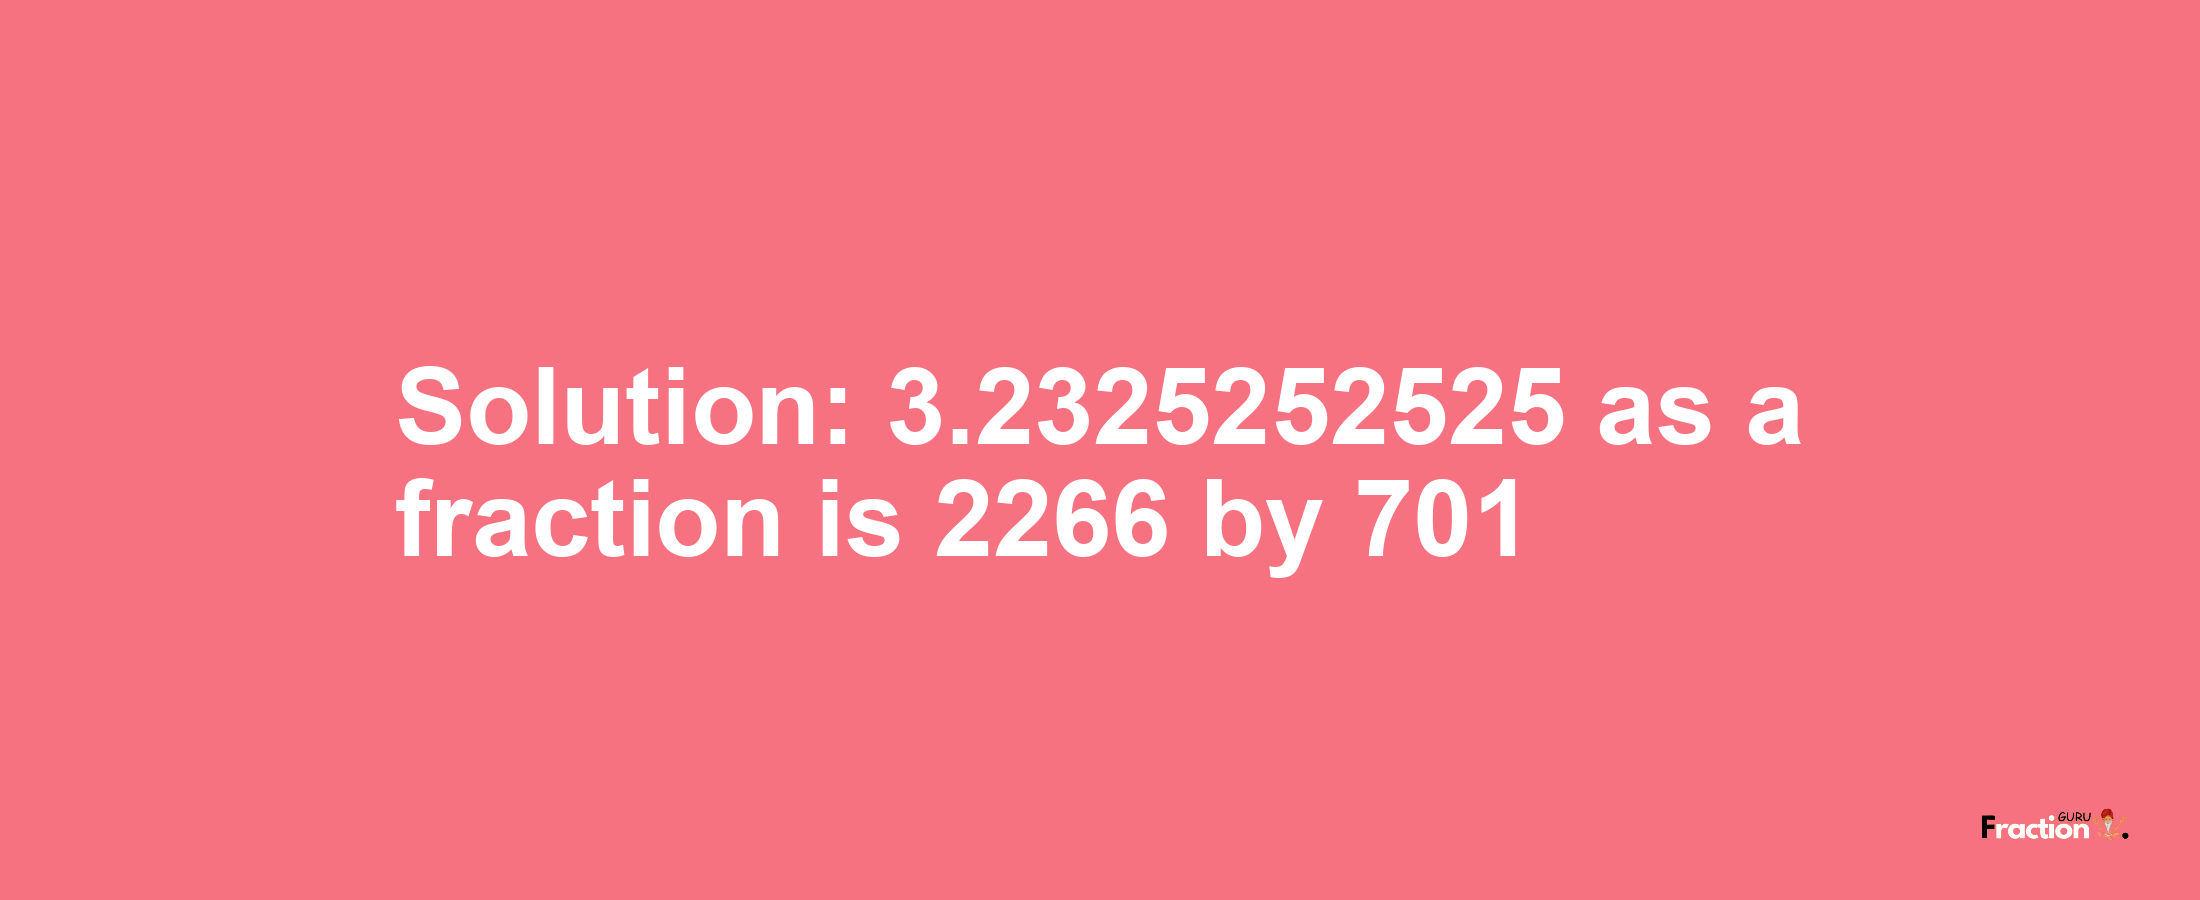 Solution:3.2325252525 as a fraction is 2266/701